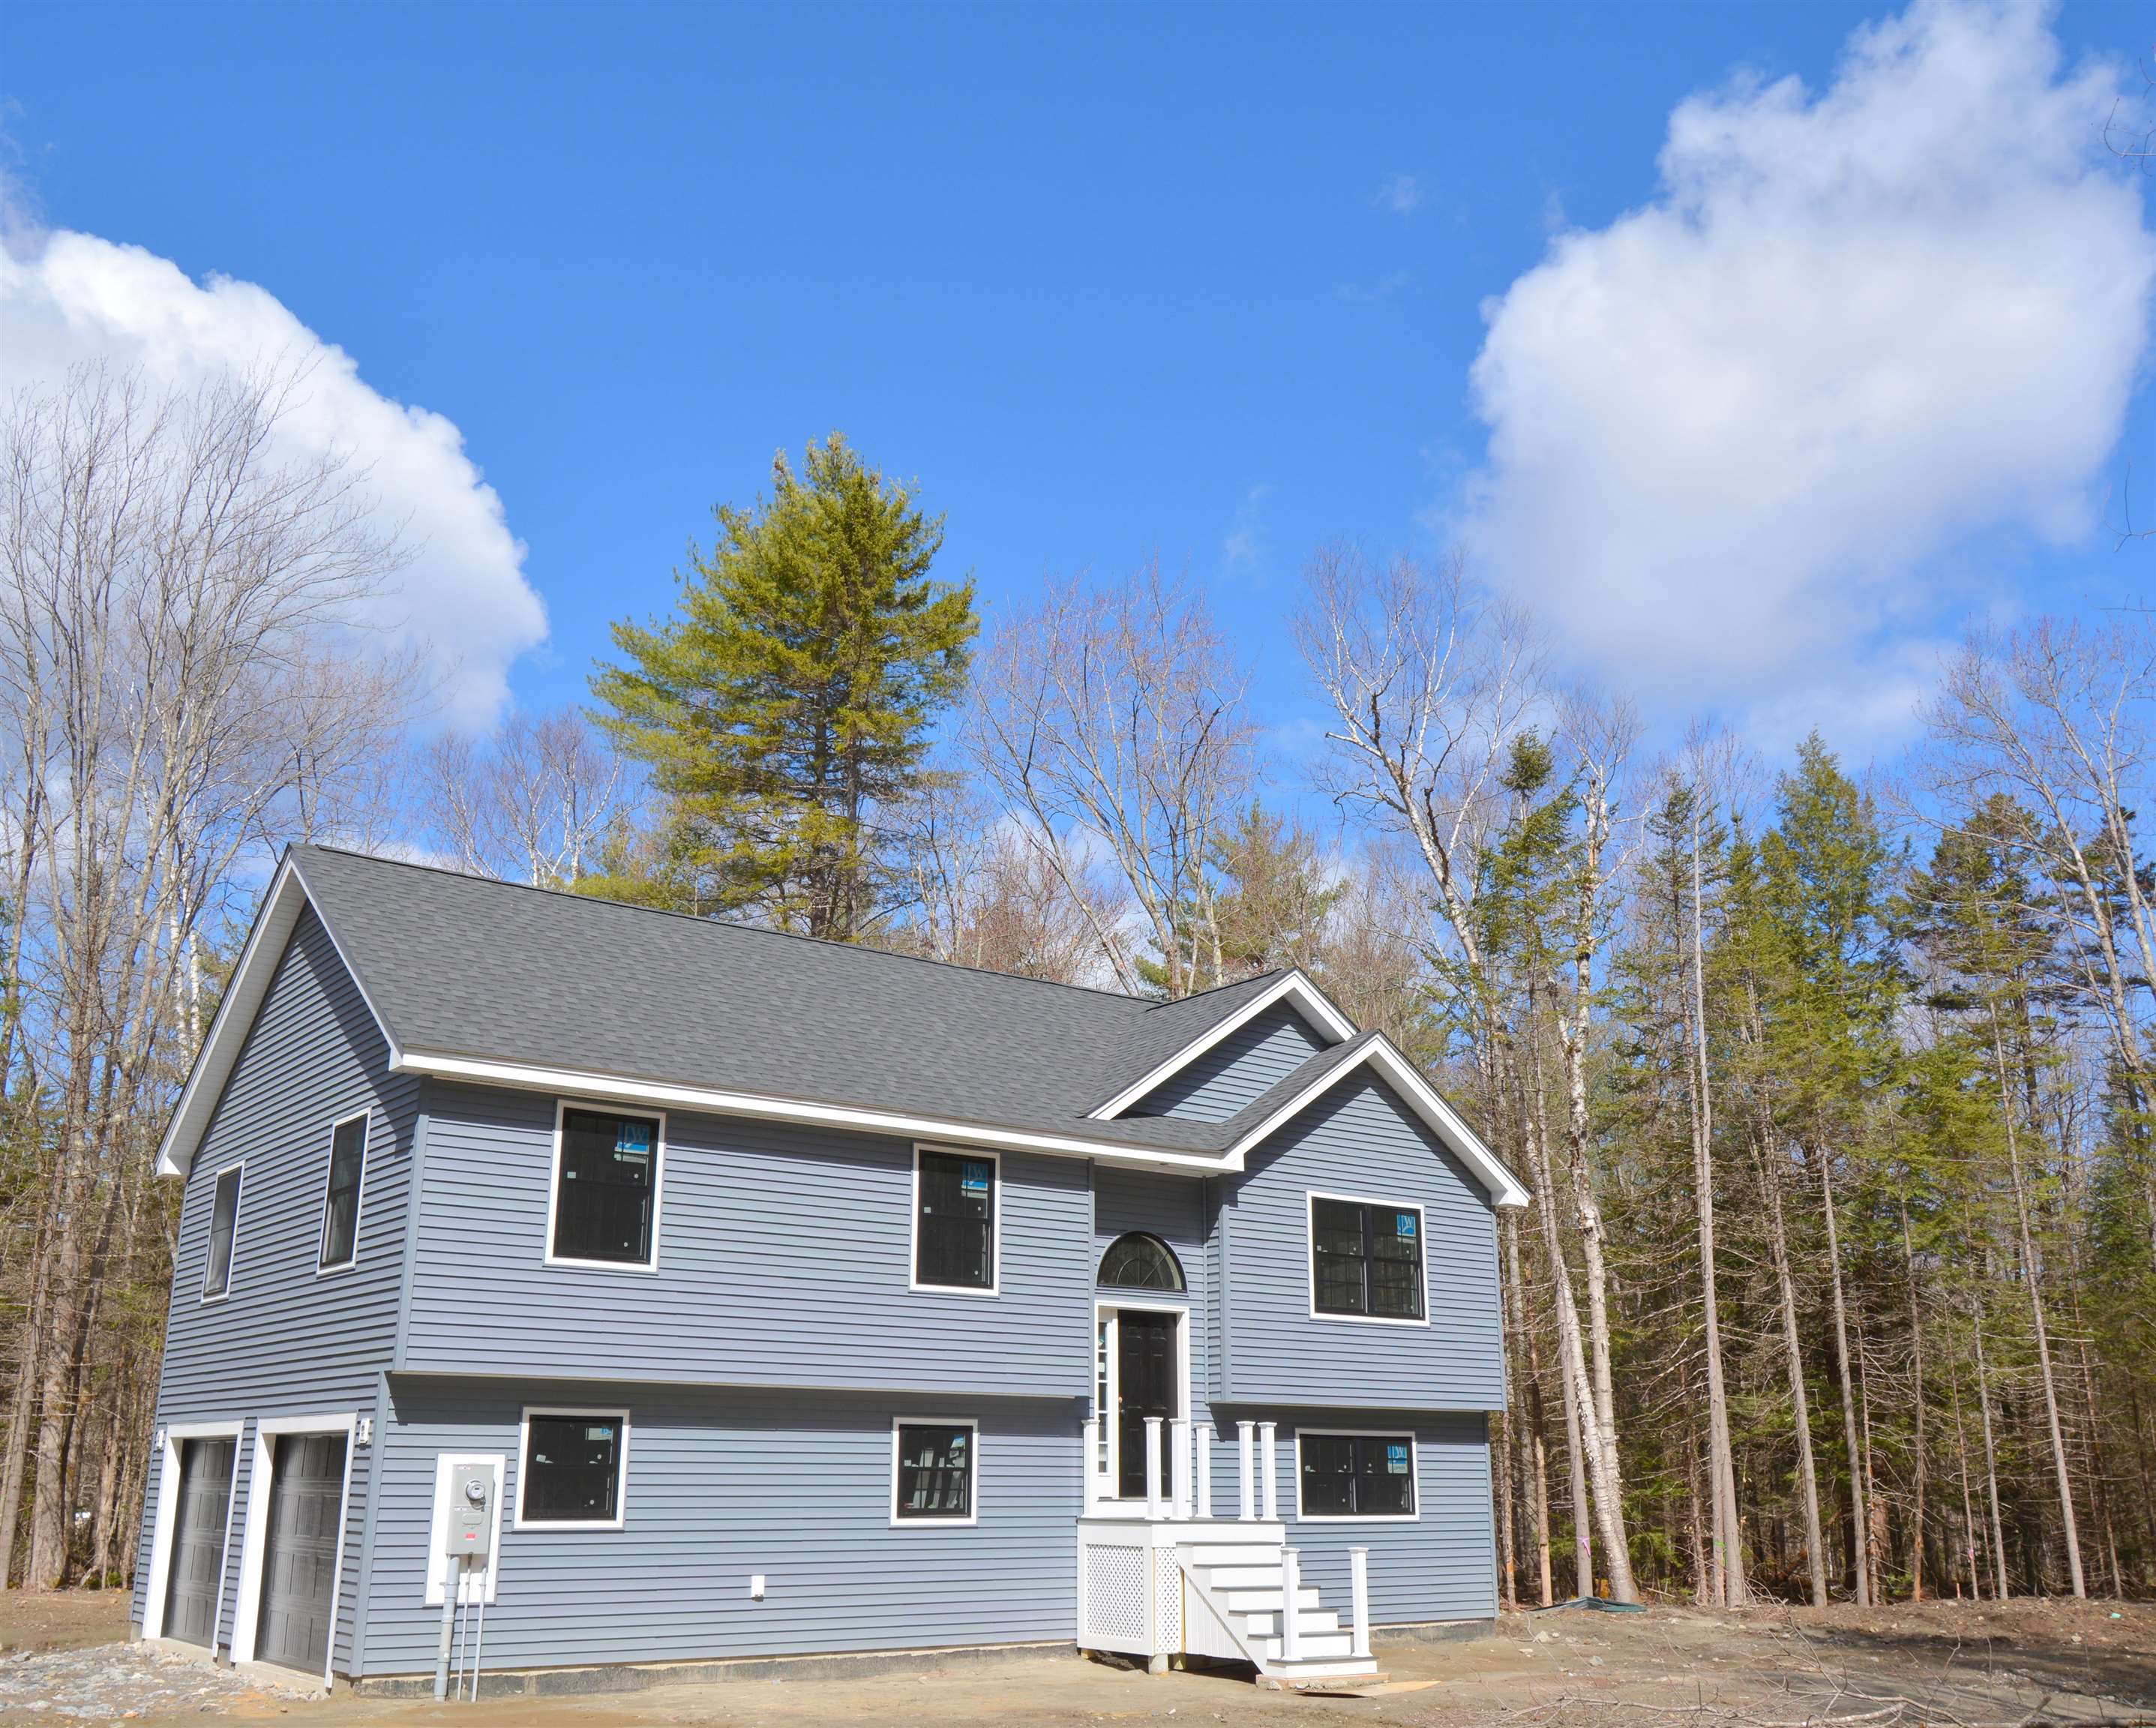 VILLAGE OF EASTMAN IN TOWN OF GRANTHAM NH Home for sale $$549,016 | $469 per sq.ft.